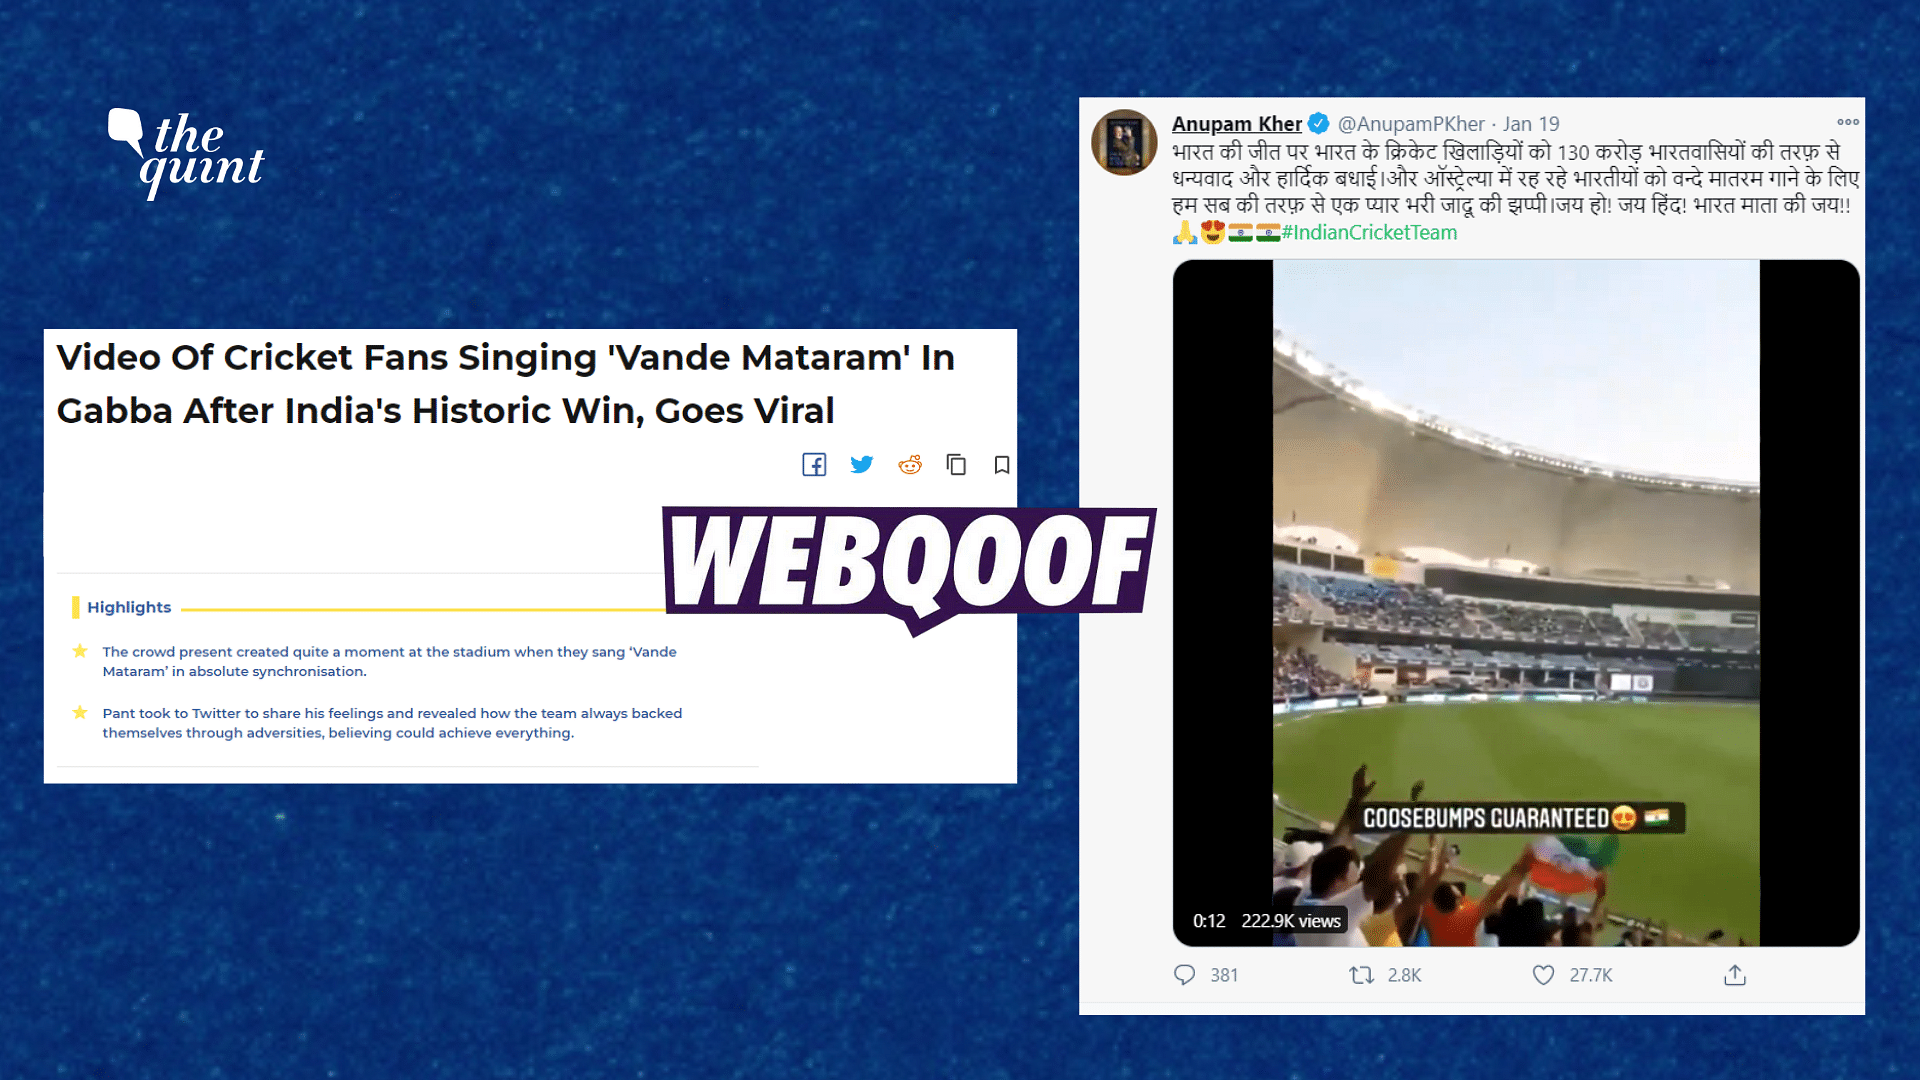 Fact-Check | A video of spectators singing ‘Vande Mataram’ during an India Pakistan cricket match has resurfaced with false claims.